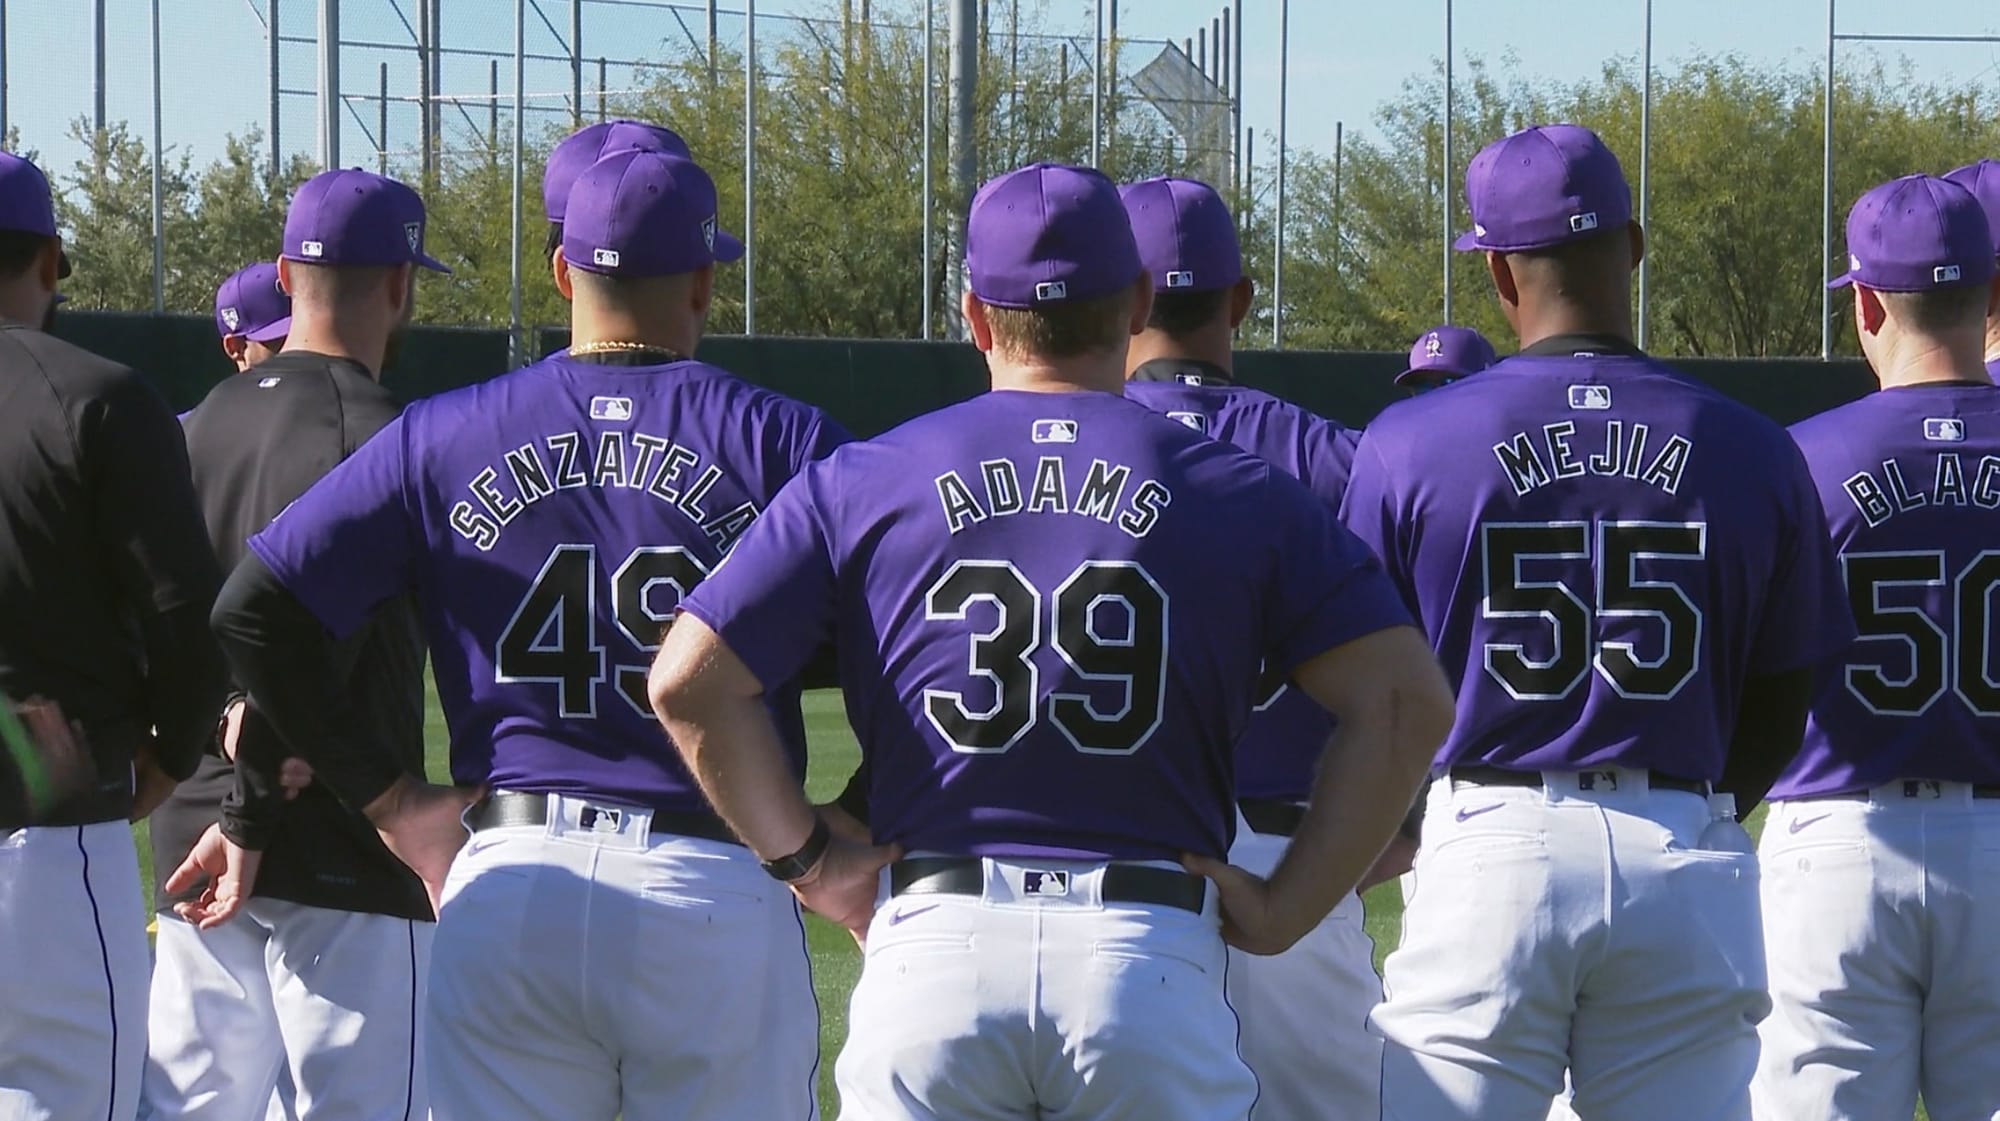 This shows the back of several Rockies players — Senzatela, Adams, Mejia. The players’ names are smaller, and not everything appears centered.